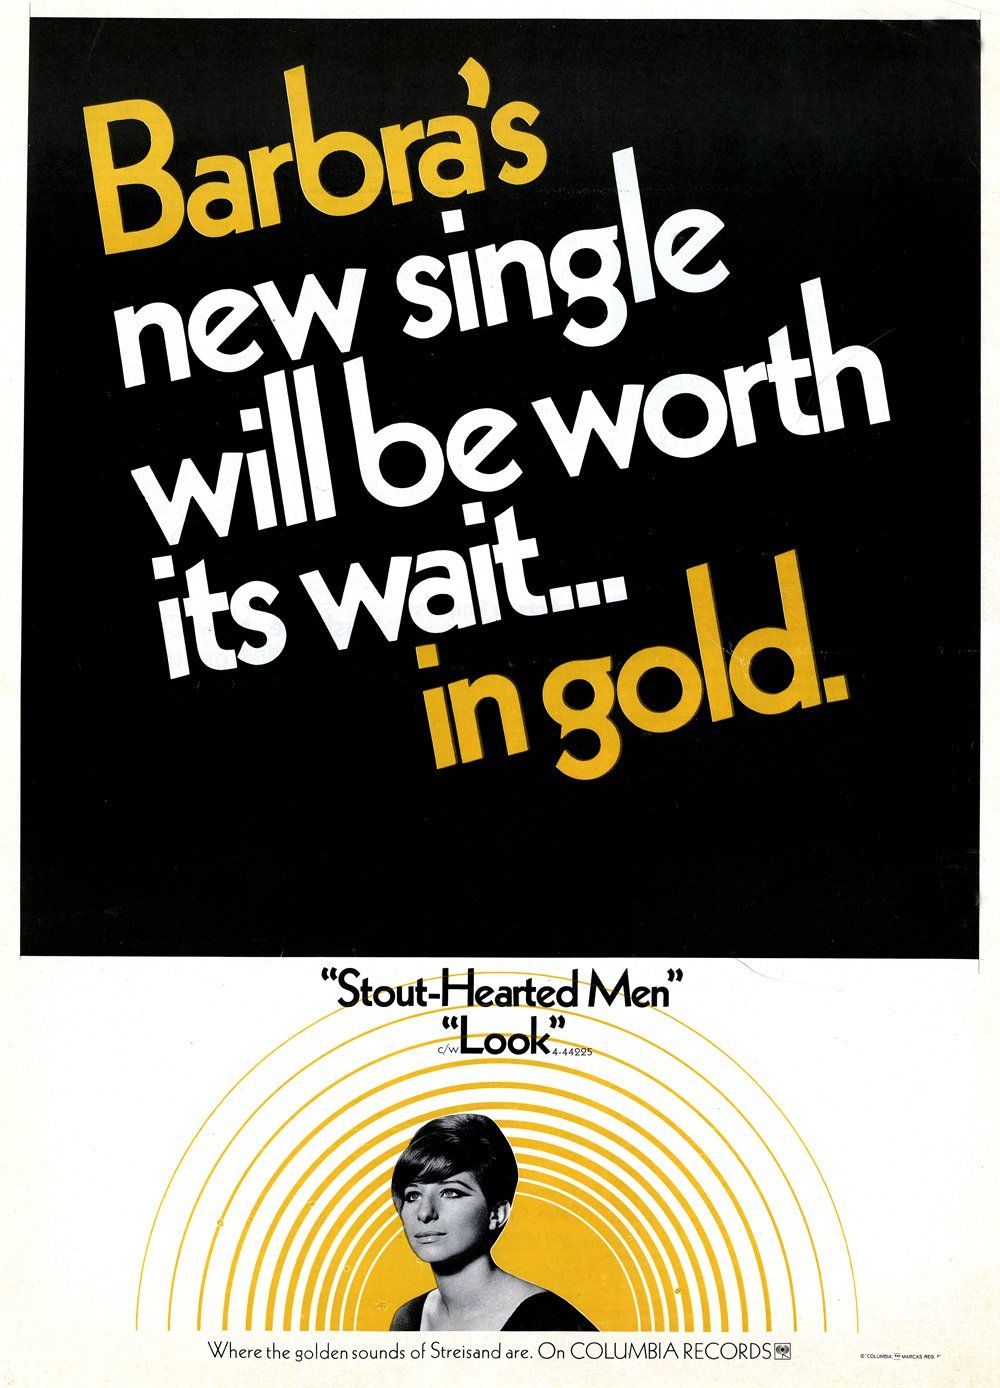 Columbia Records ad for Stout-Hearted Men single.